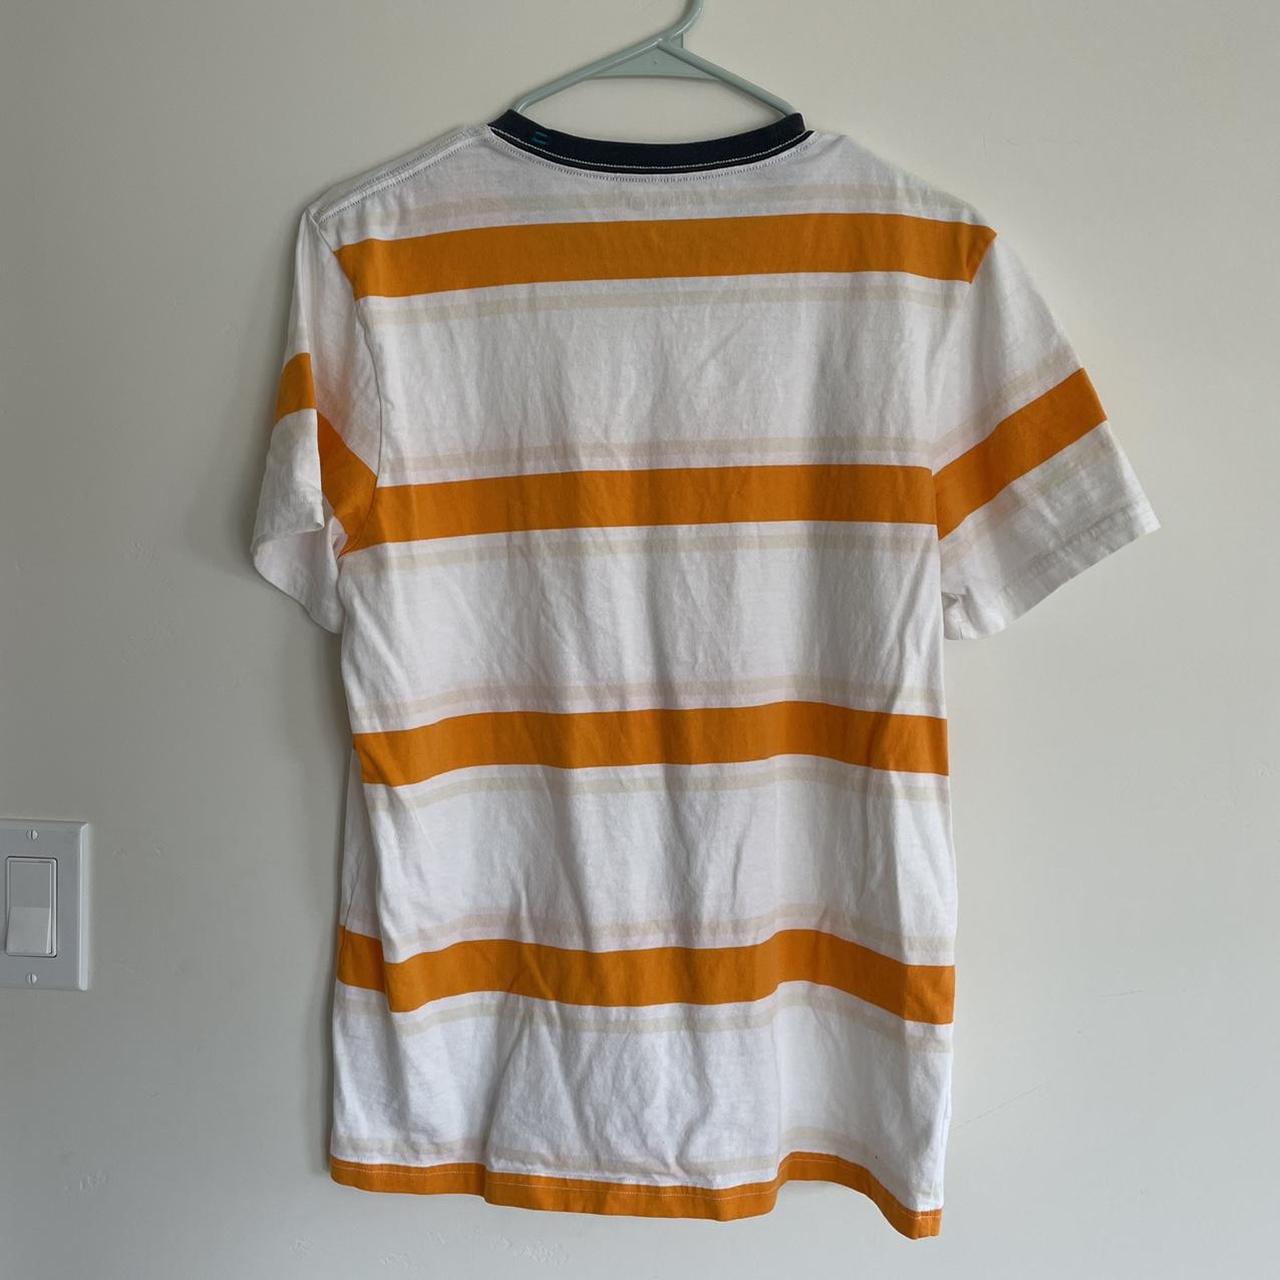 Product Image 4 - Orange and white striped Stance